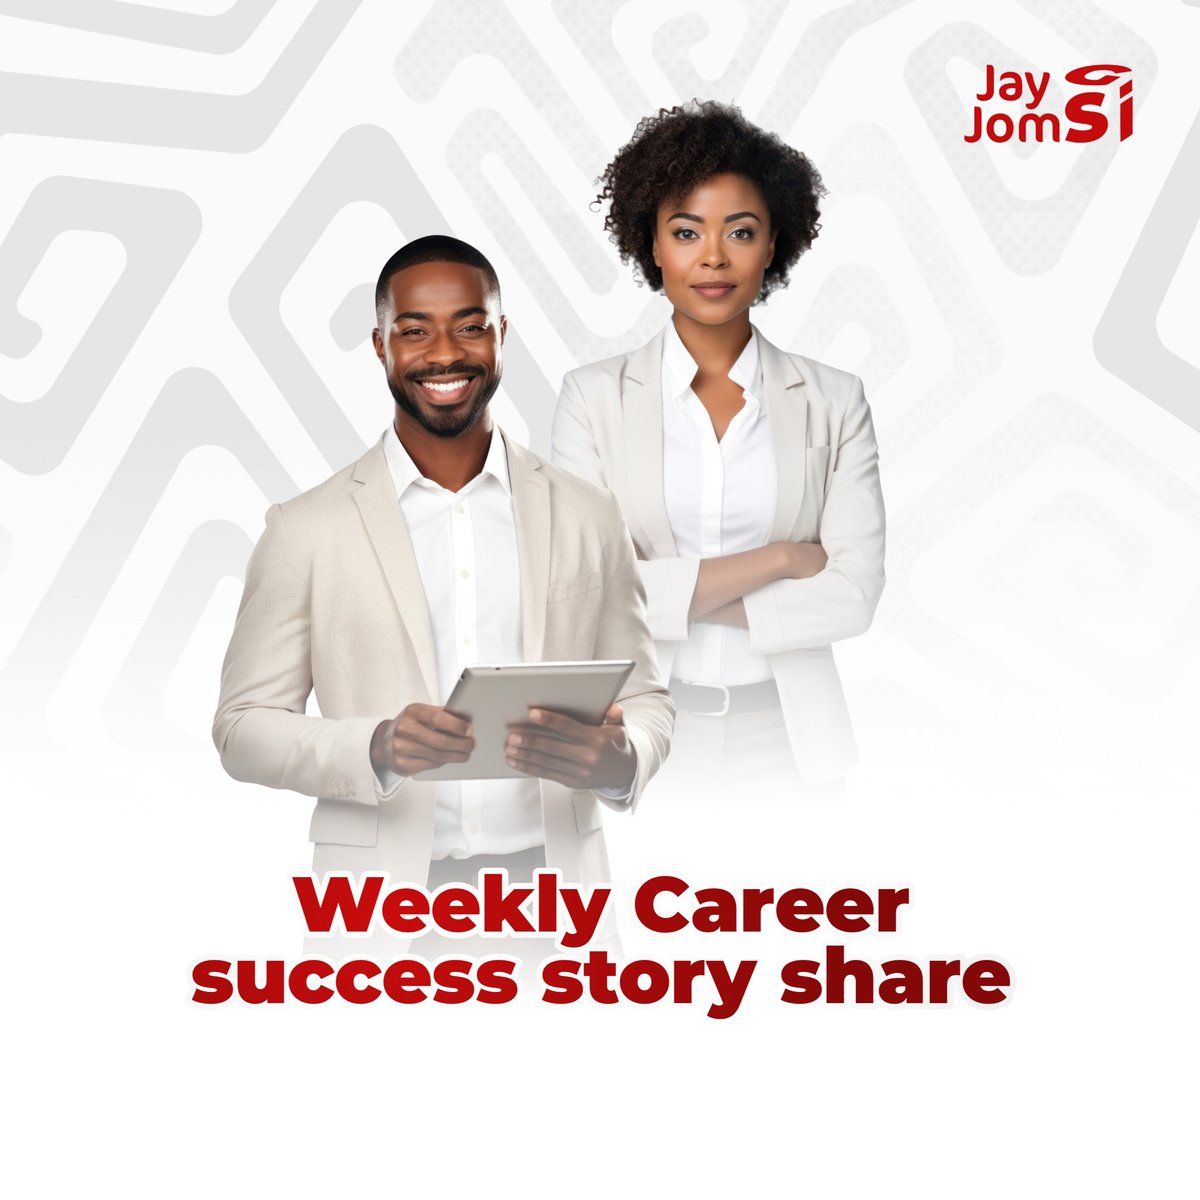 Share a recent career triumph in the comments and let's celebrate together. 

Your victories inspire others on their journey! 

#JayJom #SuccessStorySpotlight #CareerWins